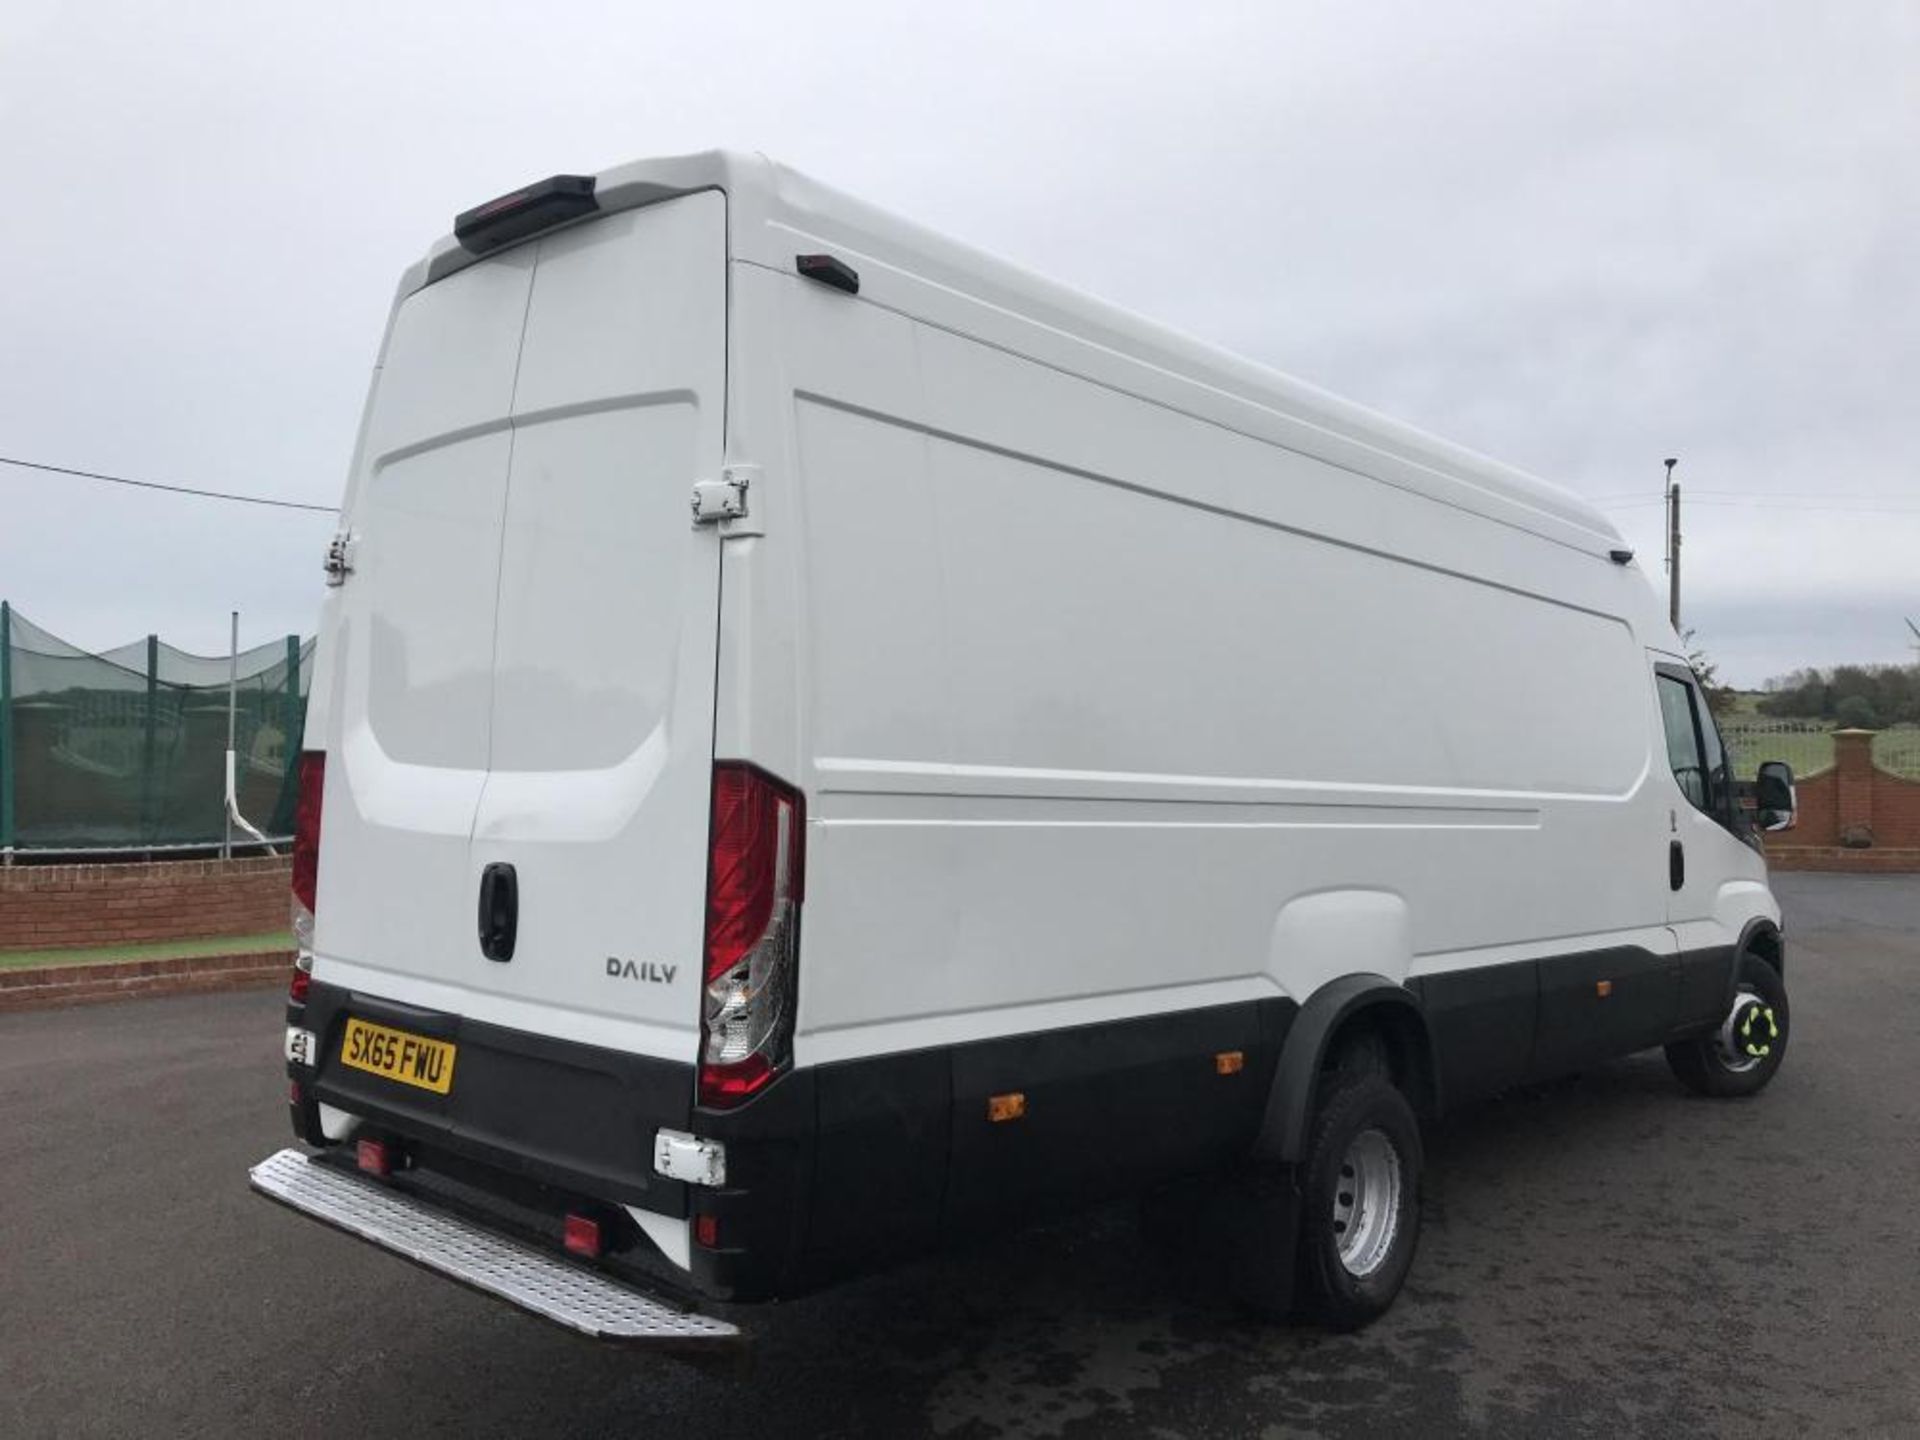 2016/65 REG IVECO DAILY 70C17 7 TON GROSS LWB REFRIGERATED 3.0 DIESEL PANEL VAN, 0 FORMER KEEPERS - Image 4 of 16